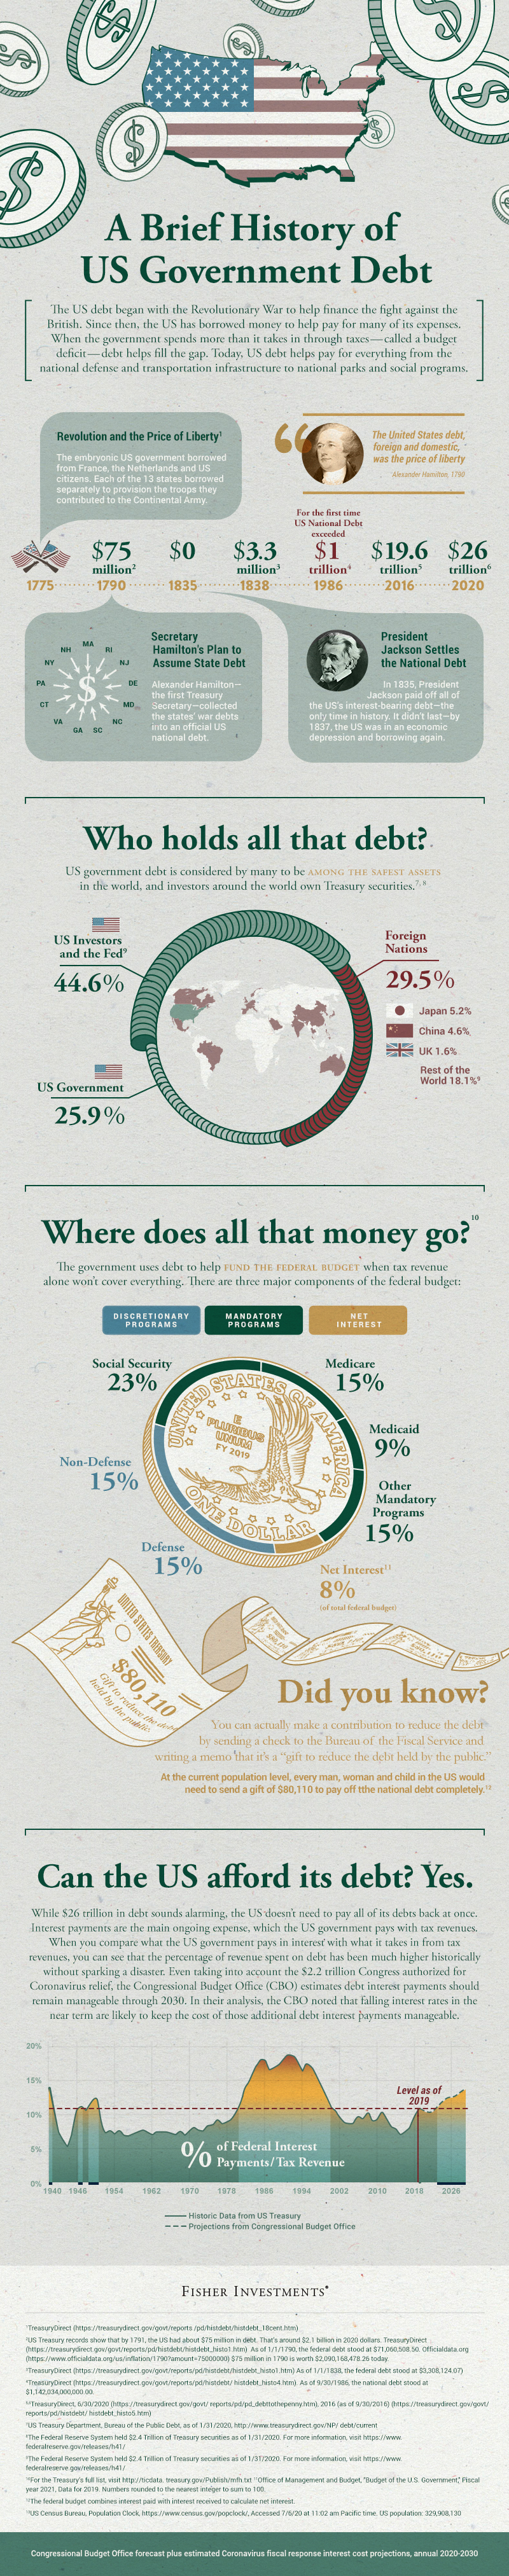 infographic of the brief history of us debt